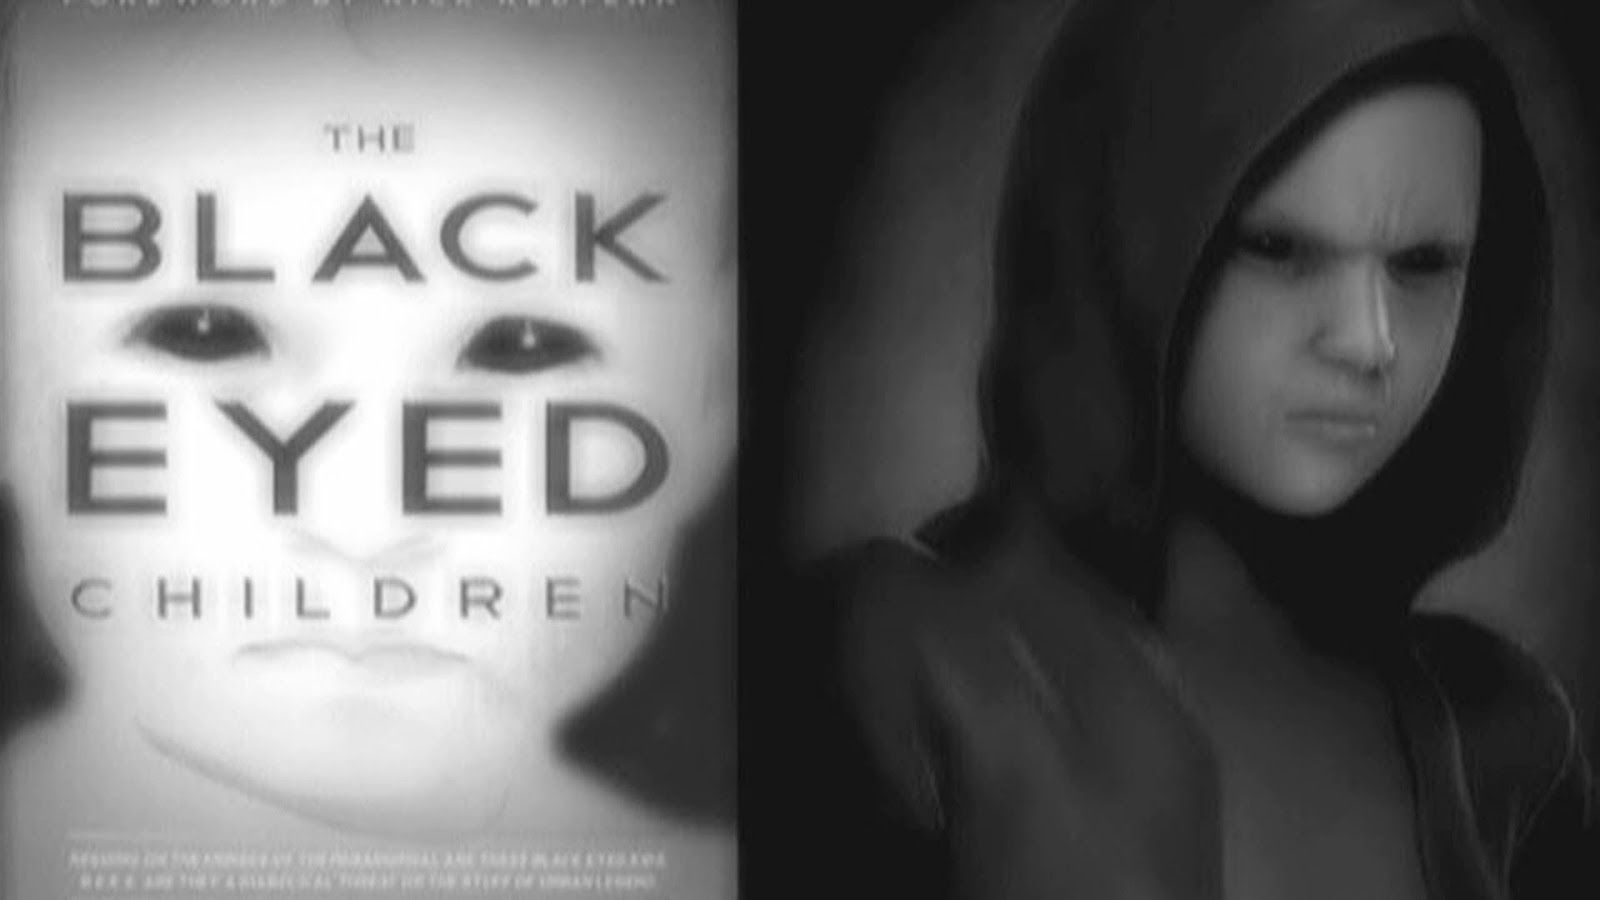 Who Are The Black Eyed Children?. Eye .com